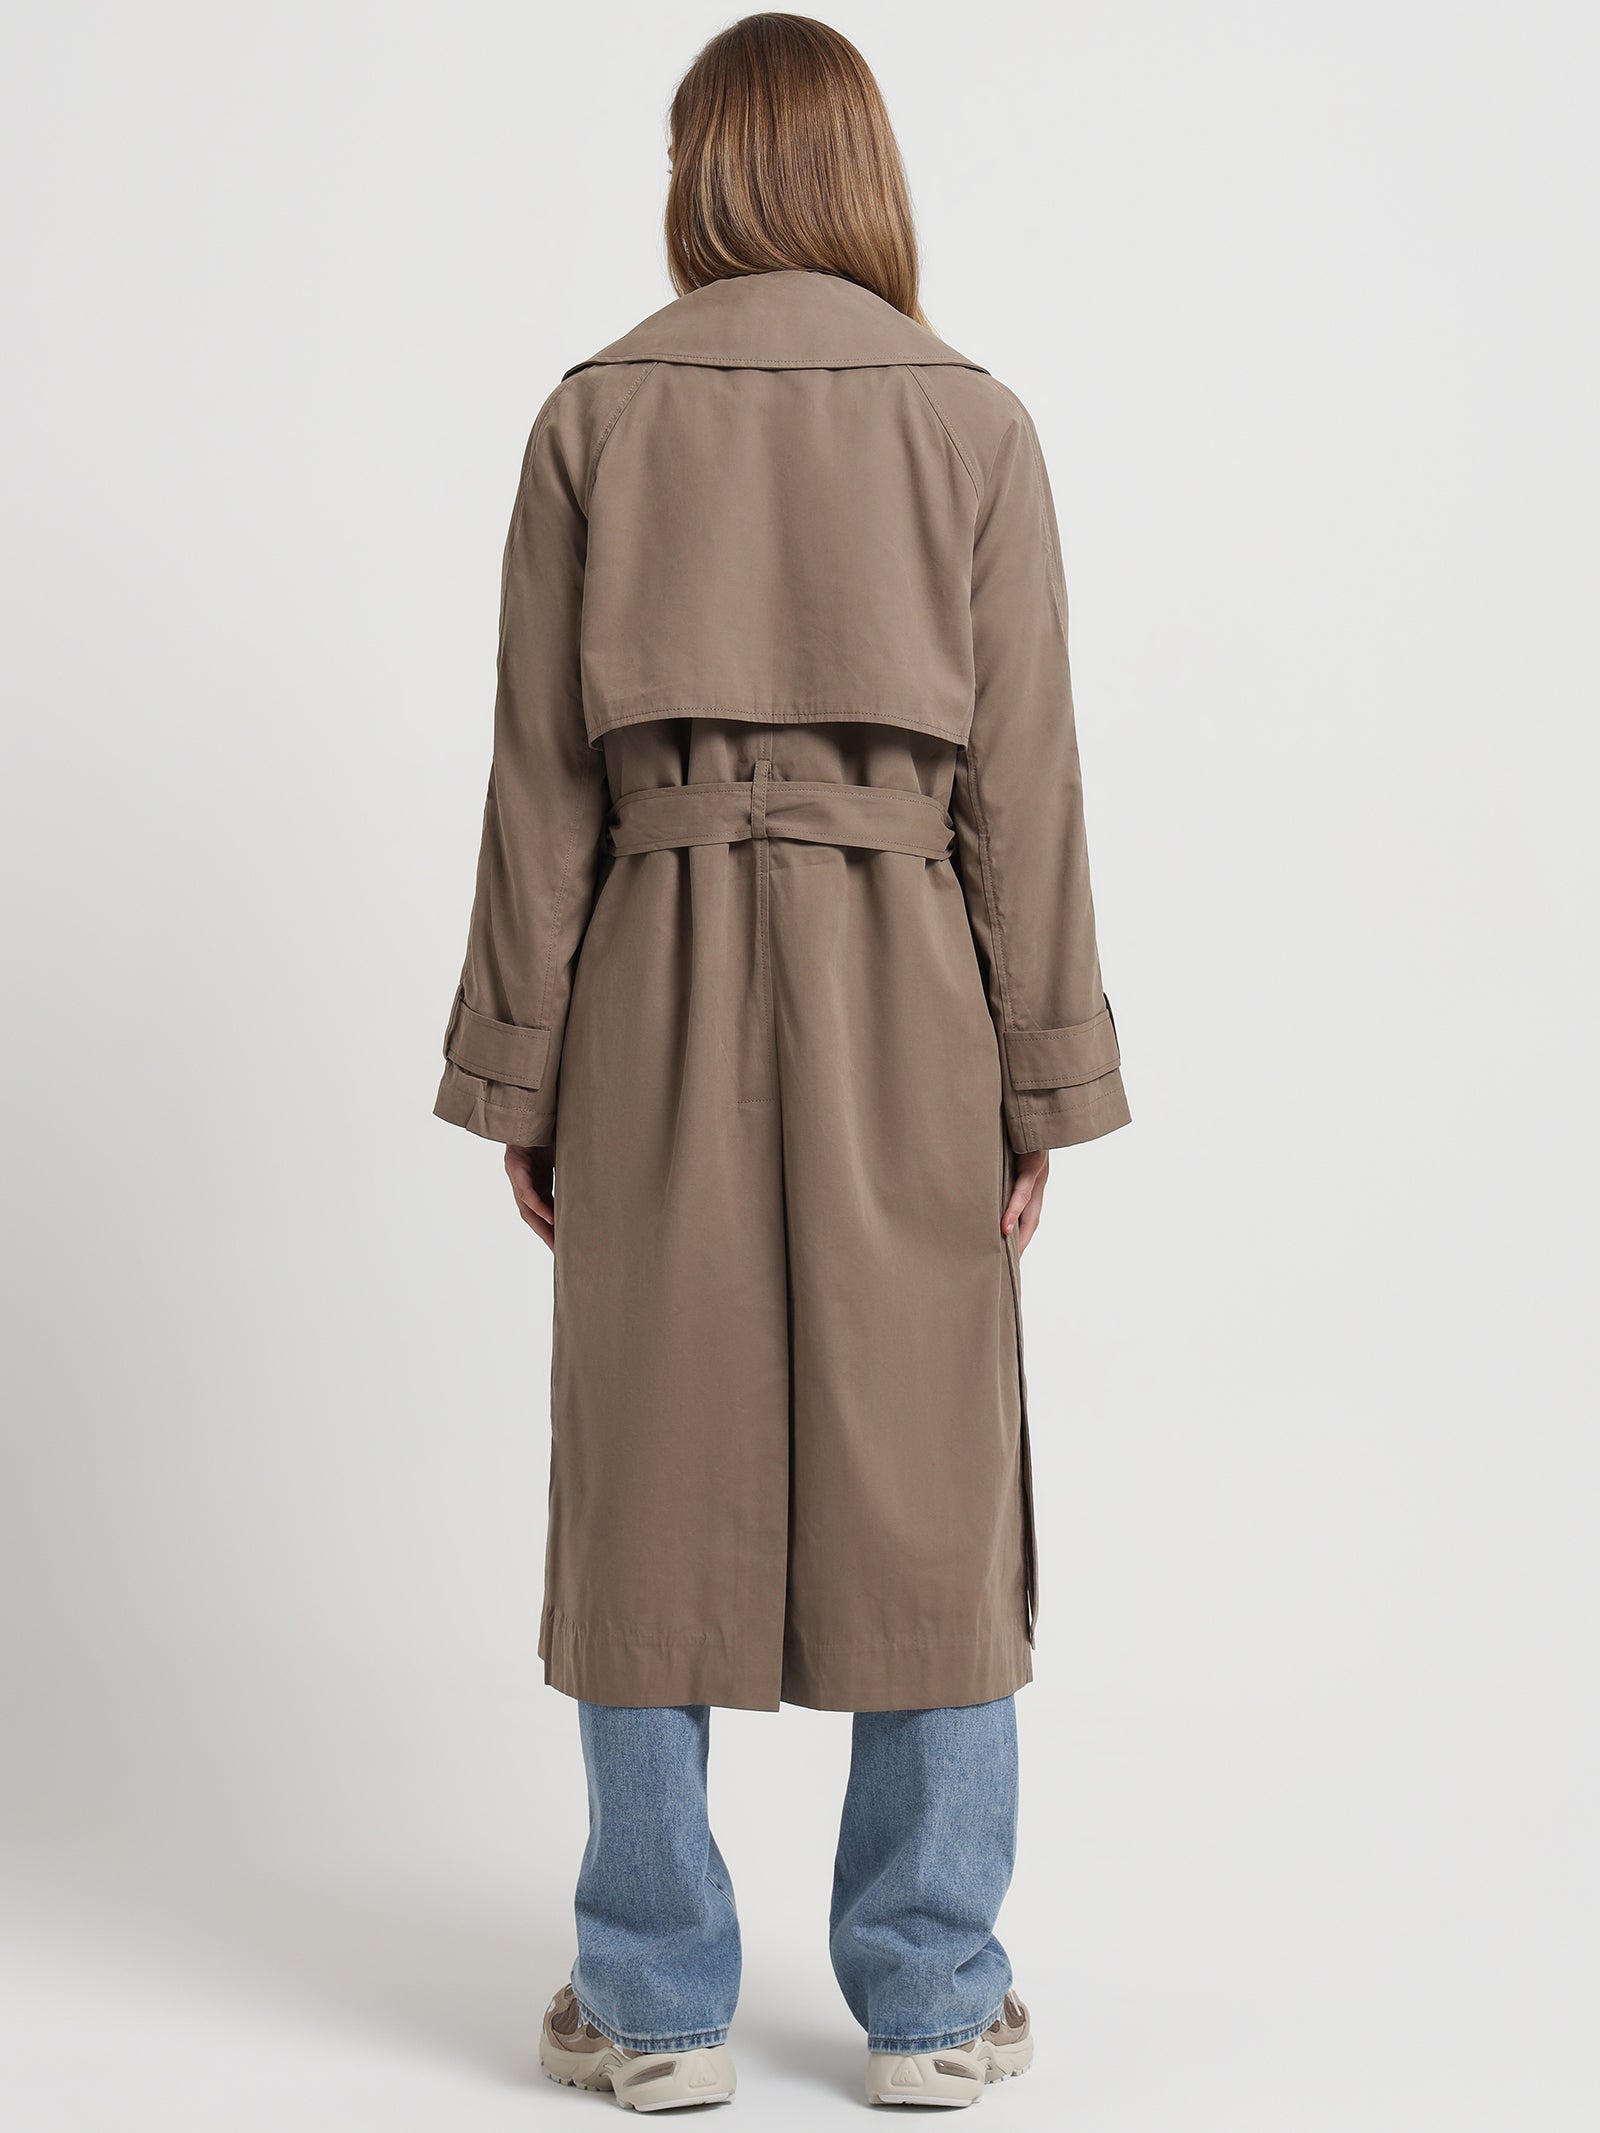 Odyssey Trench Coat in Smoke Brown